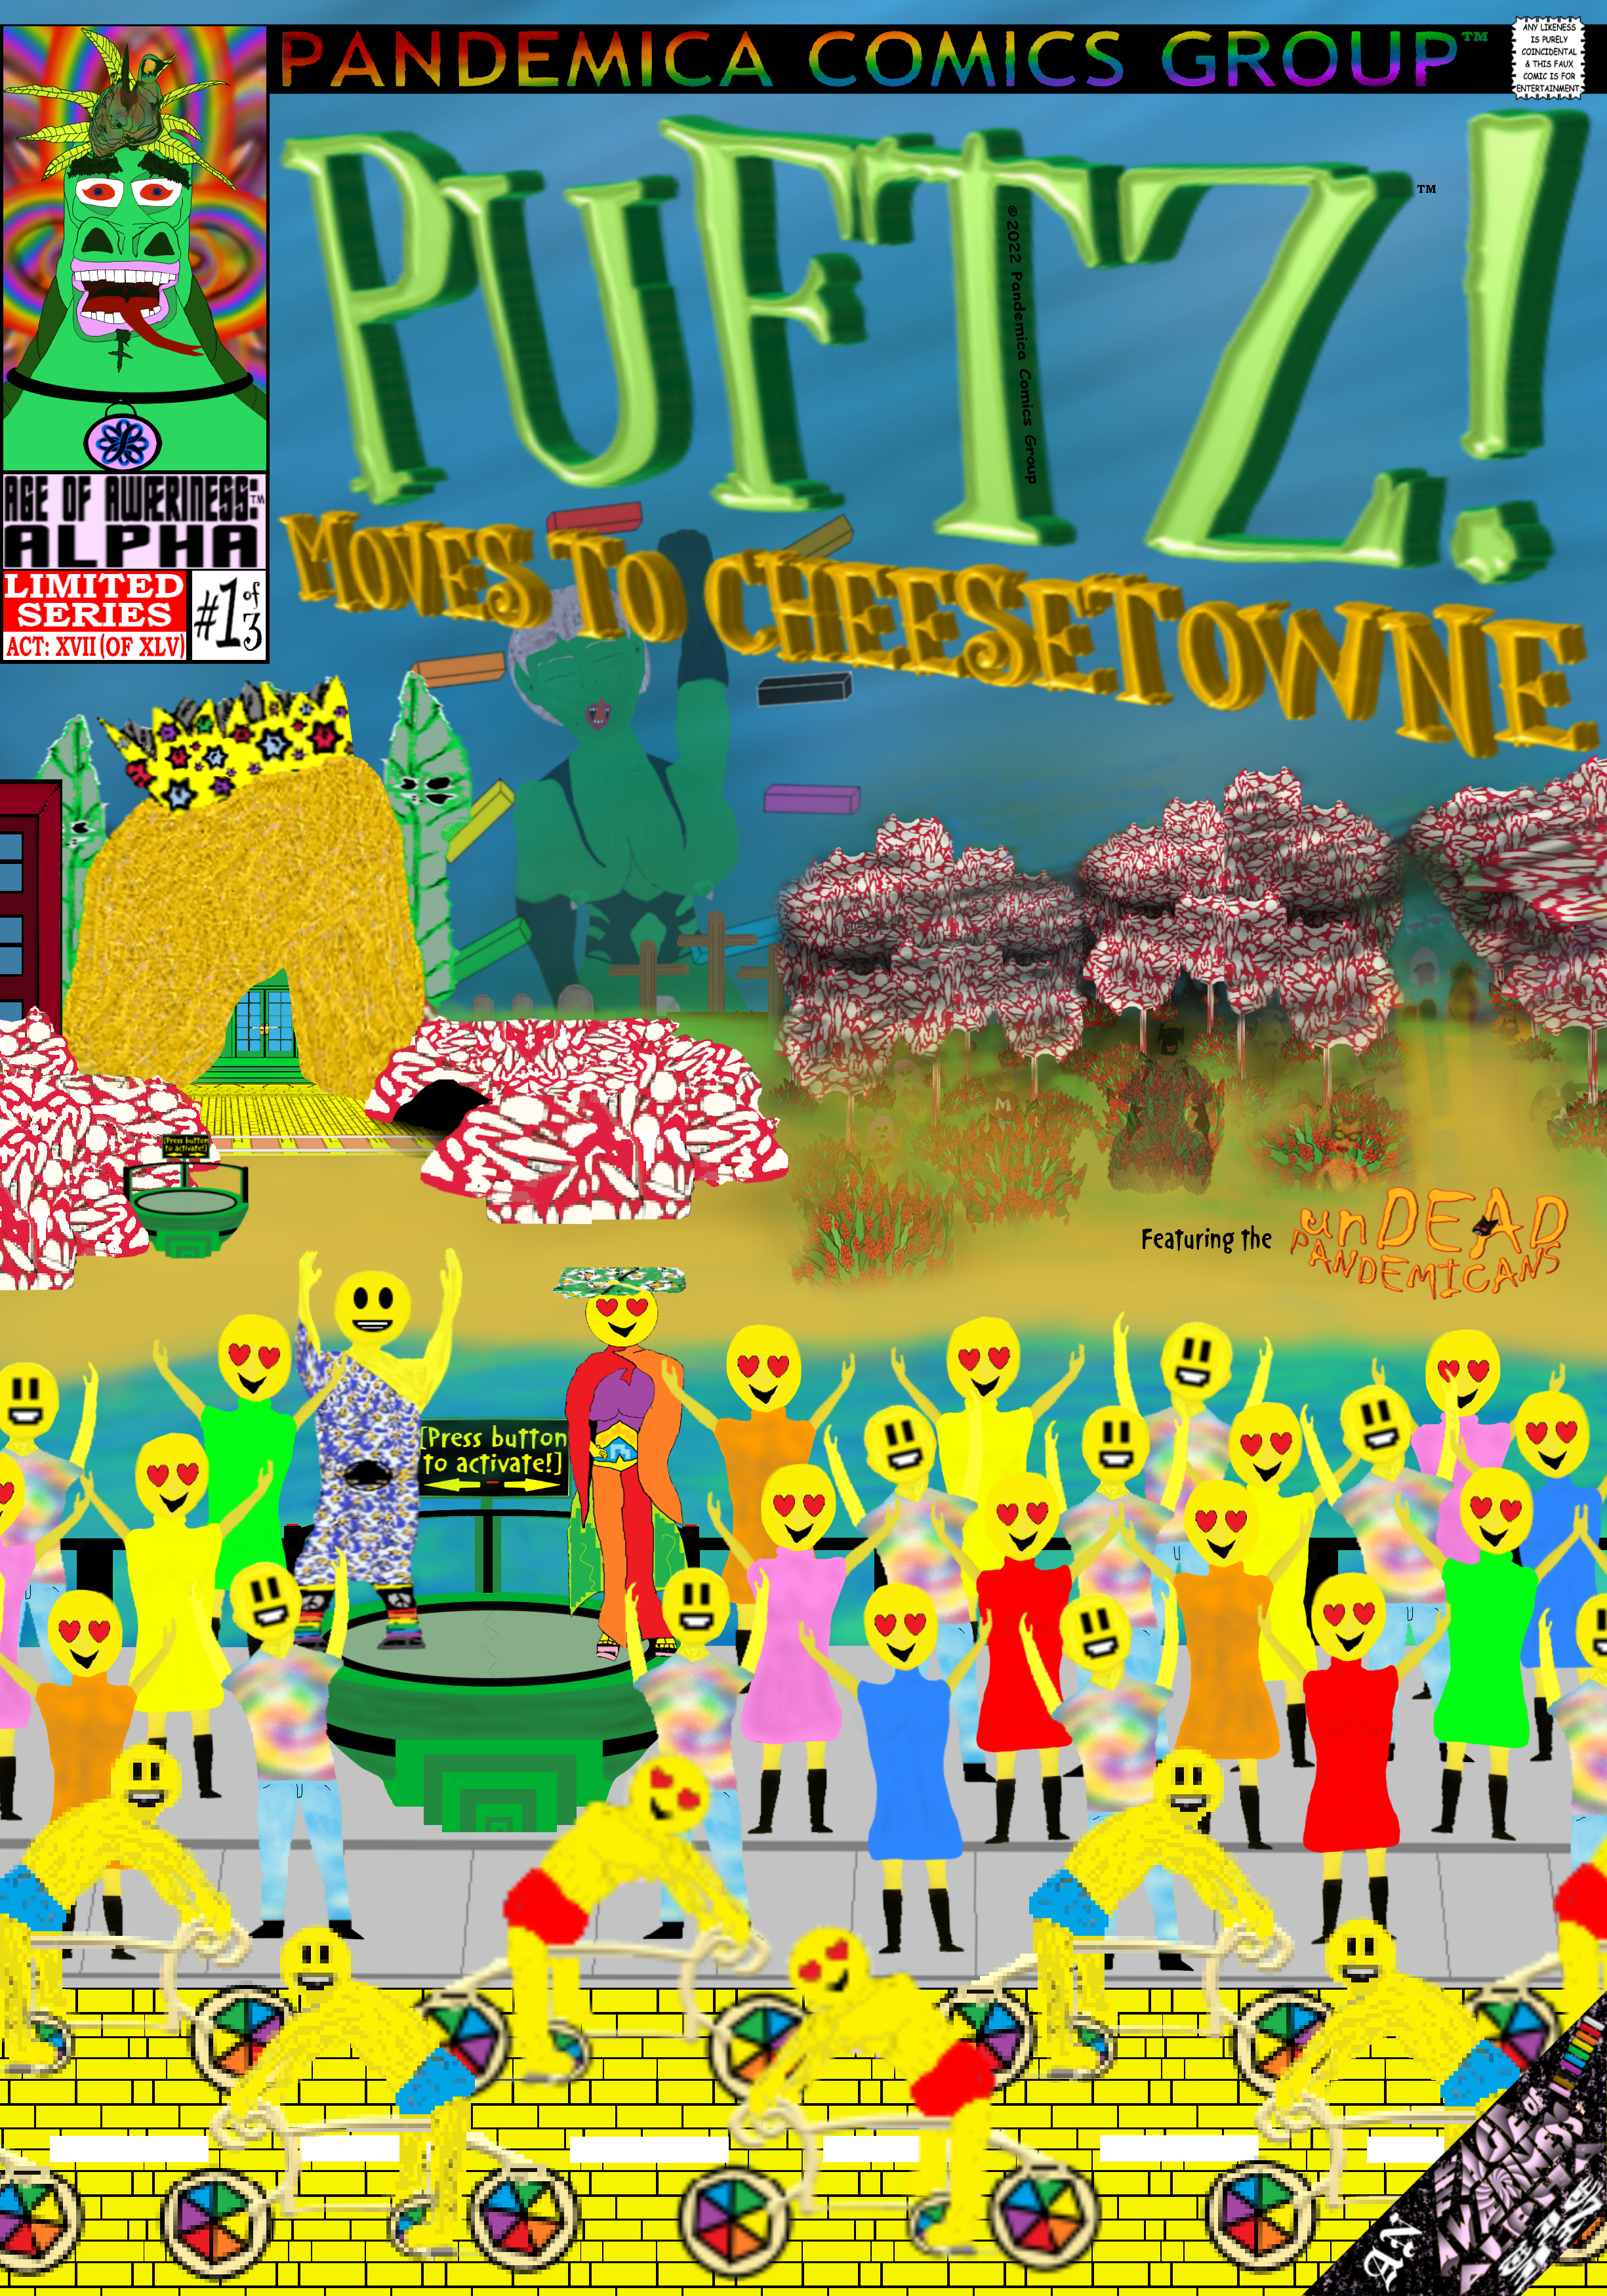 PUFTZ! [Moves To Cheesetowne] #1